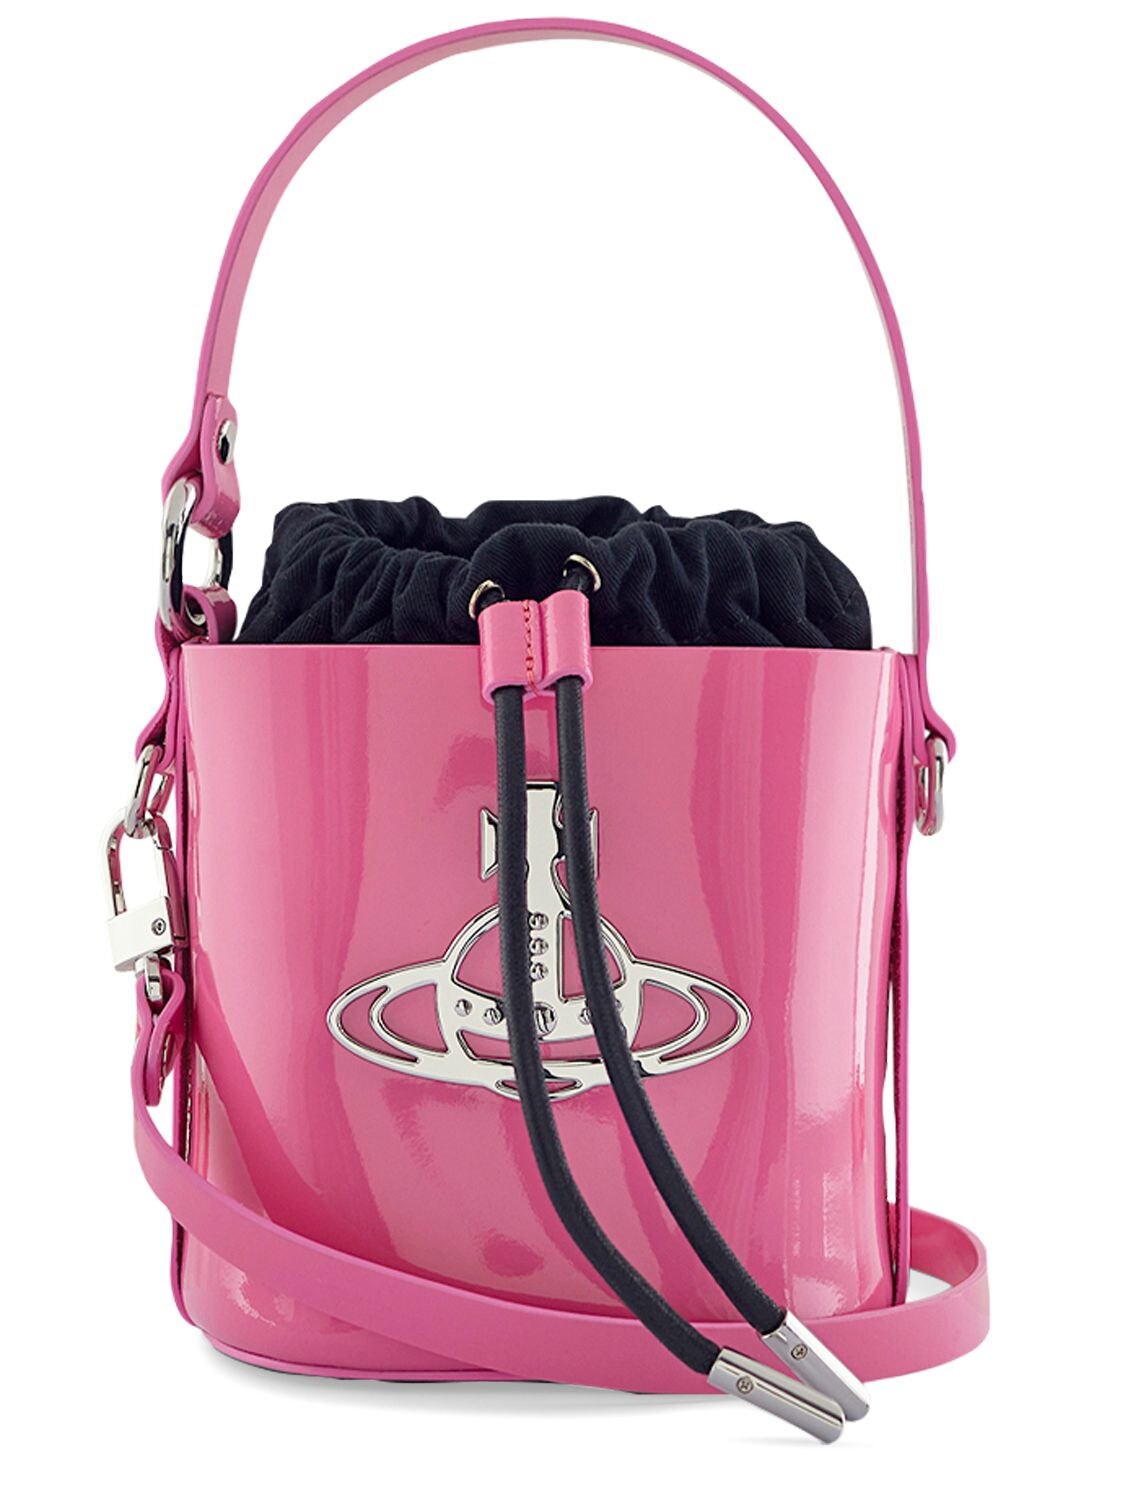 Image of Small Daisy Patent Leather Bucket Bag